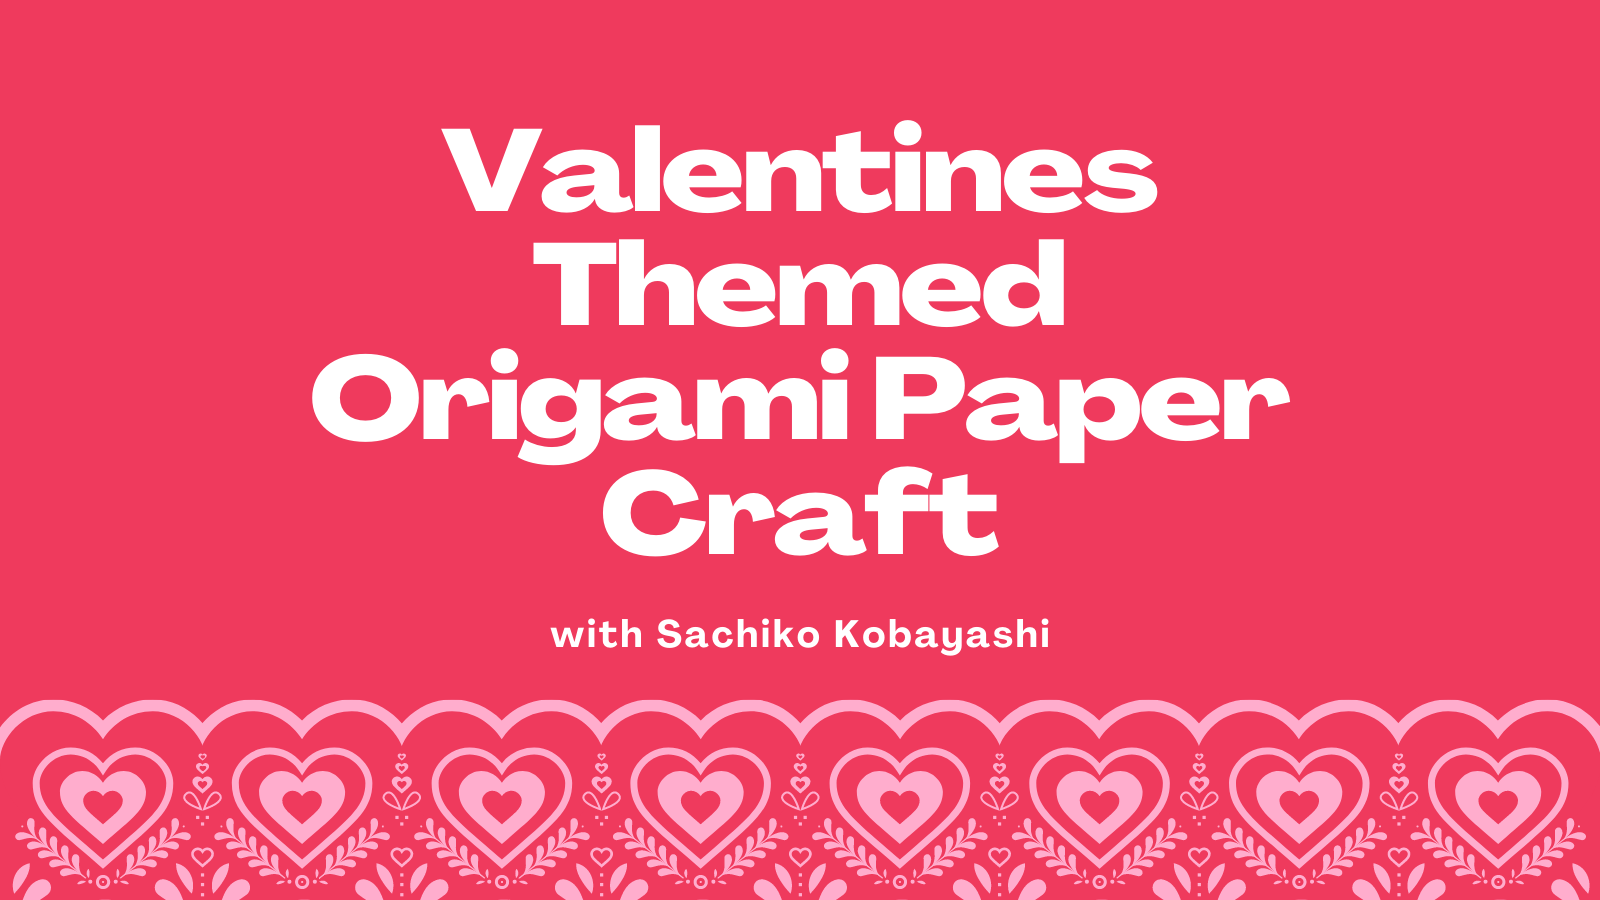 Valentines Themed Origami Paper Craft (1)